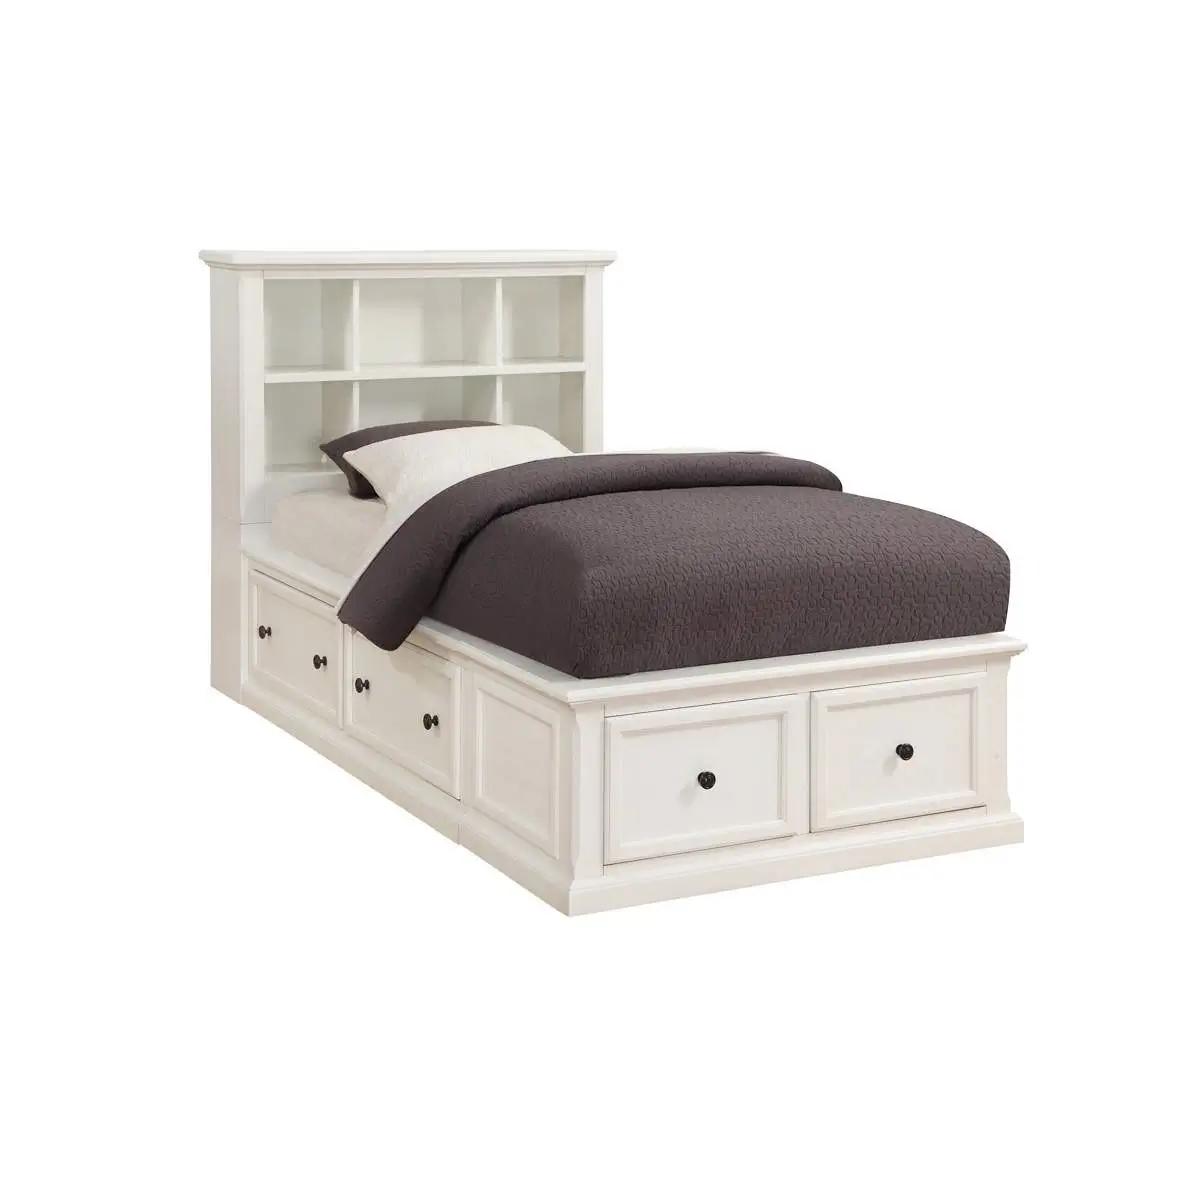 Kids Bookcase Bed White Full With, Value City Bookcase Bed Frame